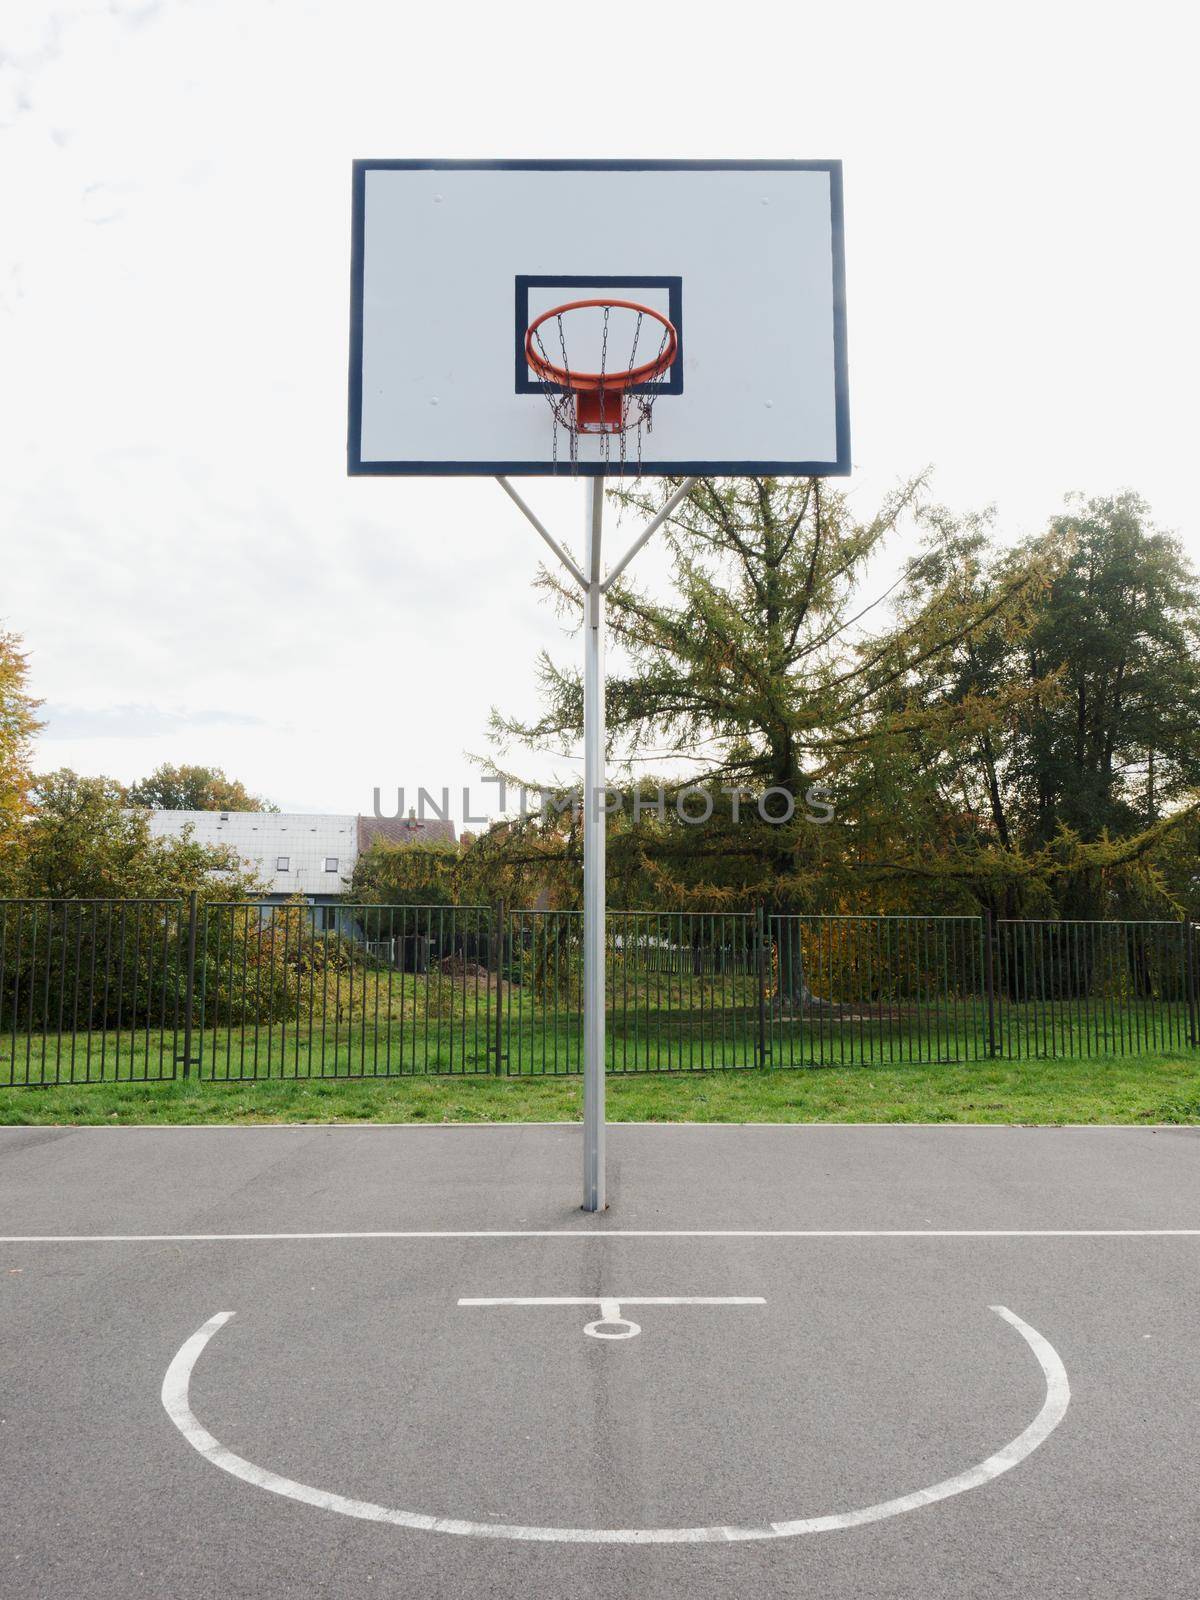 Basketball hoop and a cage with poor asphalt by rdonar2